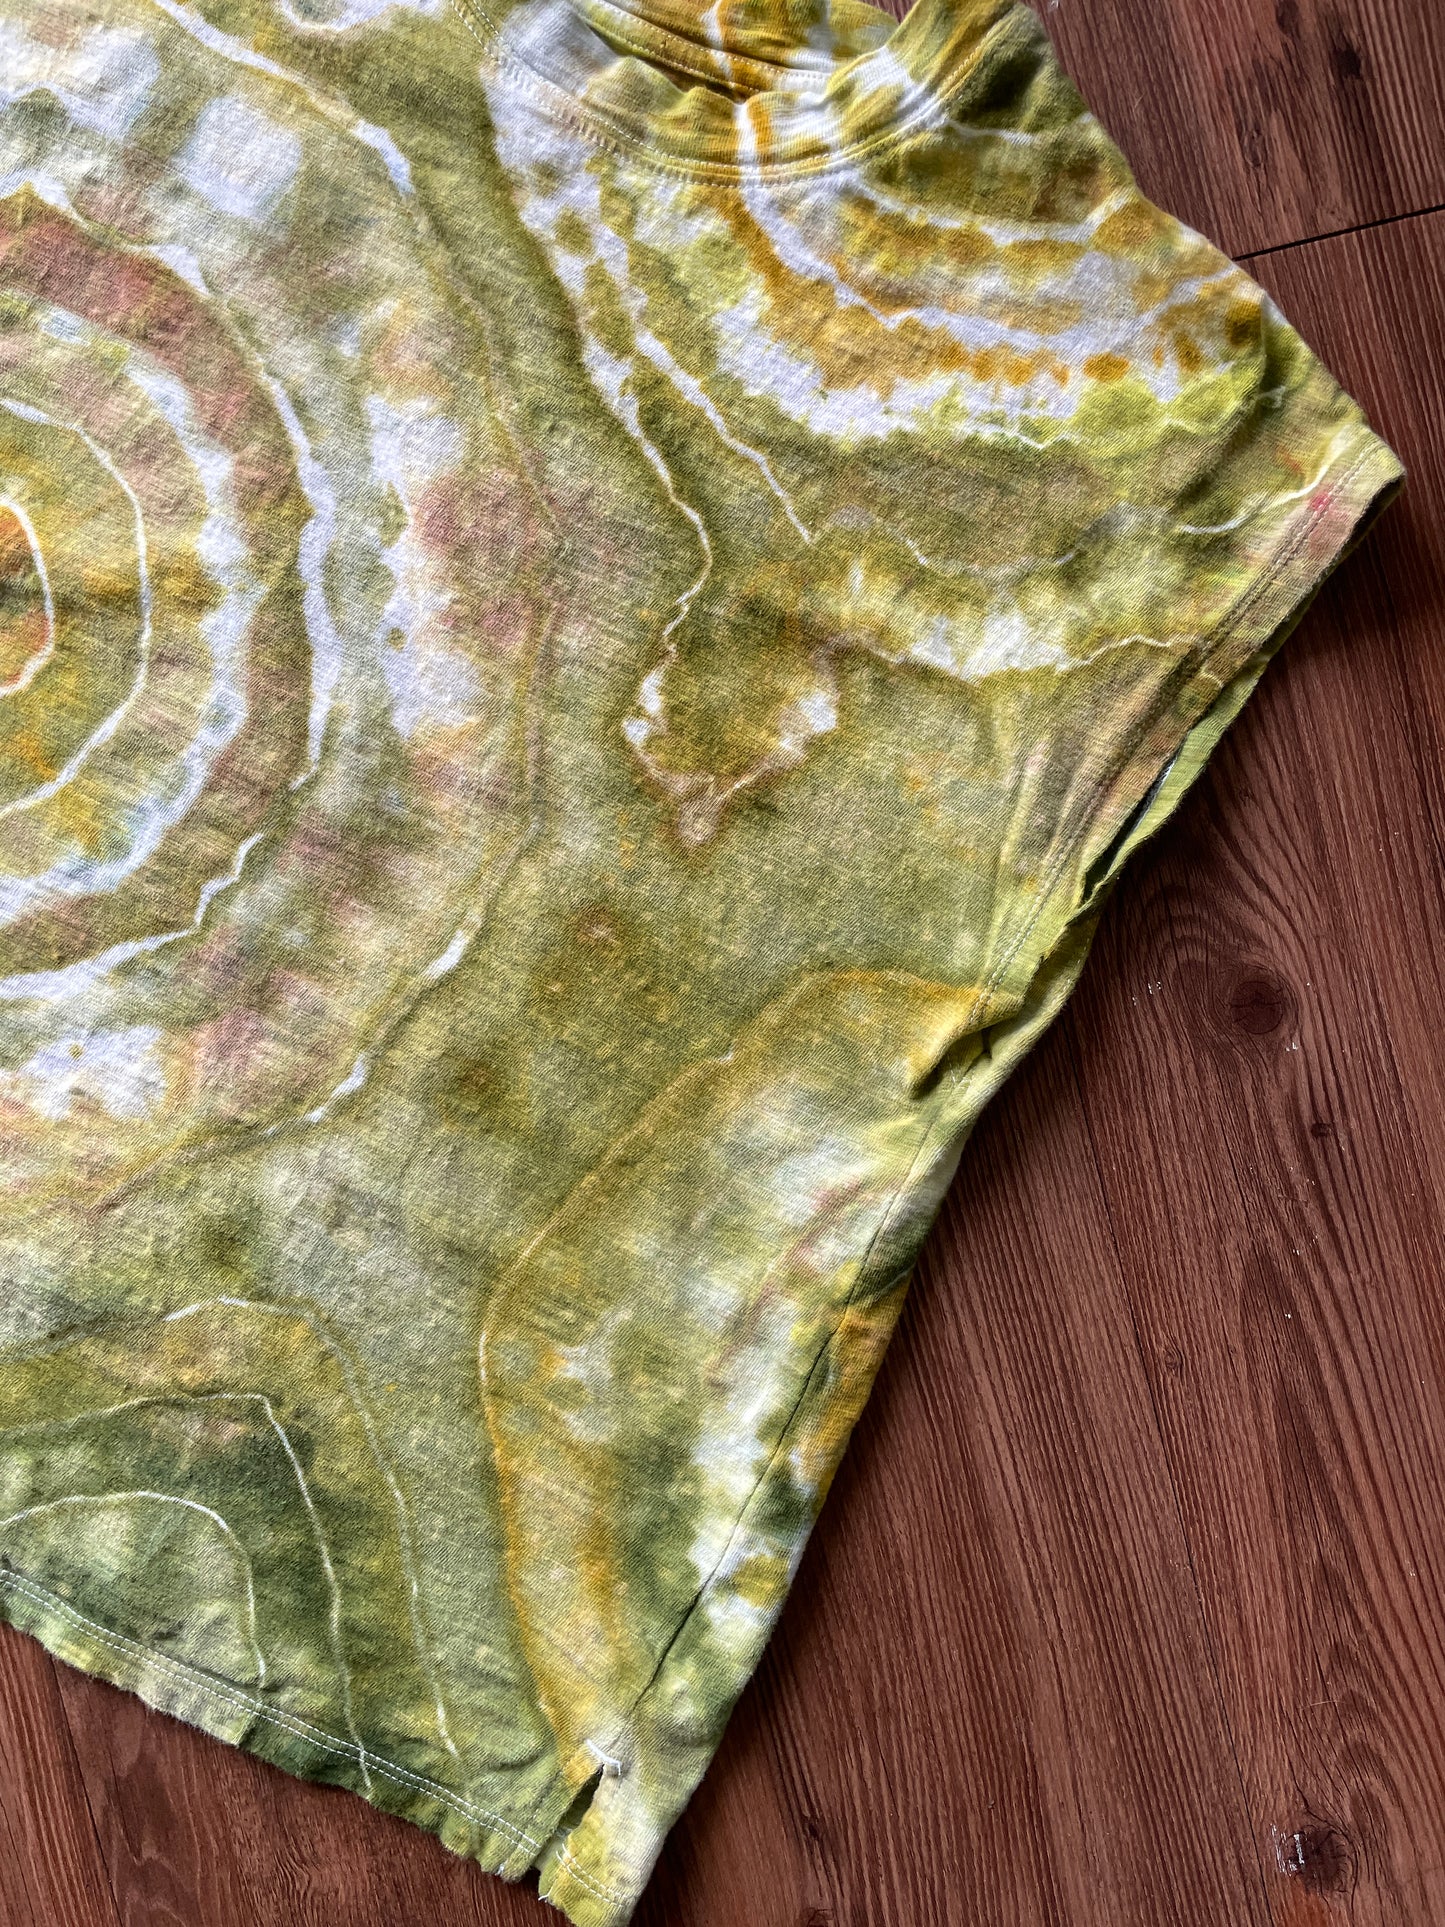 MEDIUM Women’s Earth Tones Geode Handmade Tie Dye Muscle Tee | One-Of-a-Kind Green and Yellow Short Sleeve T-Shirt